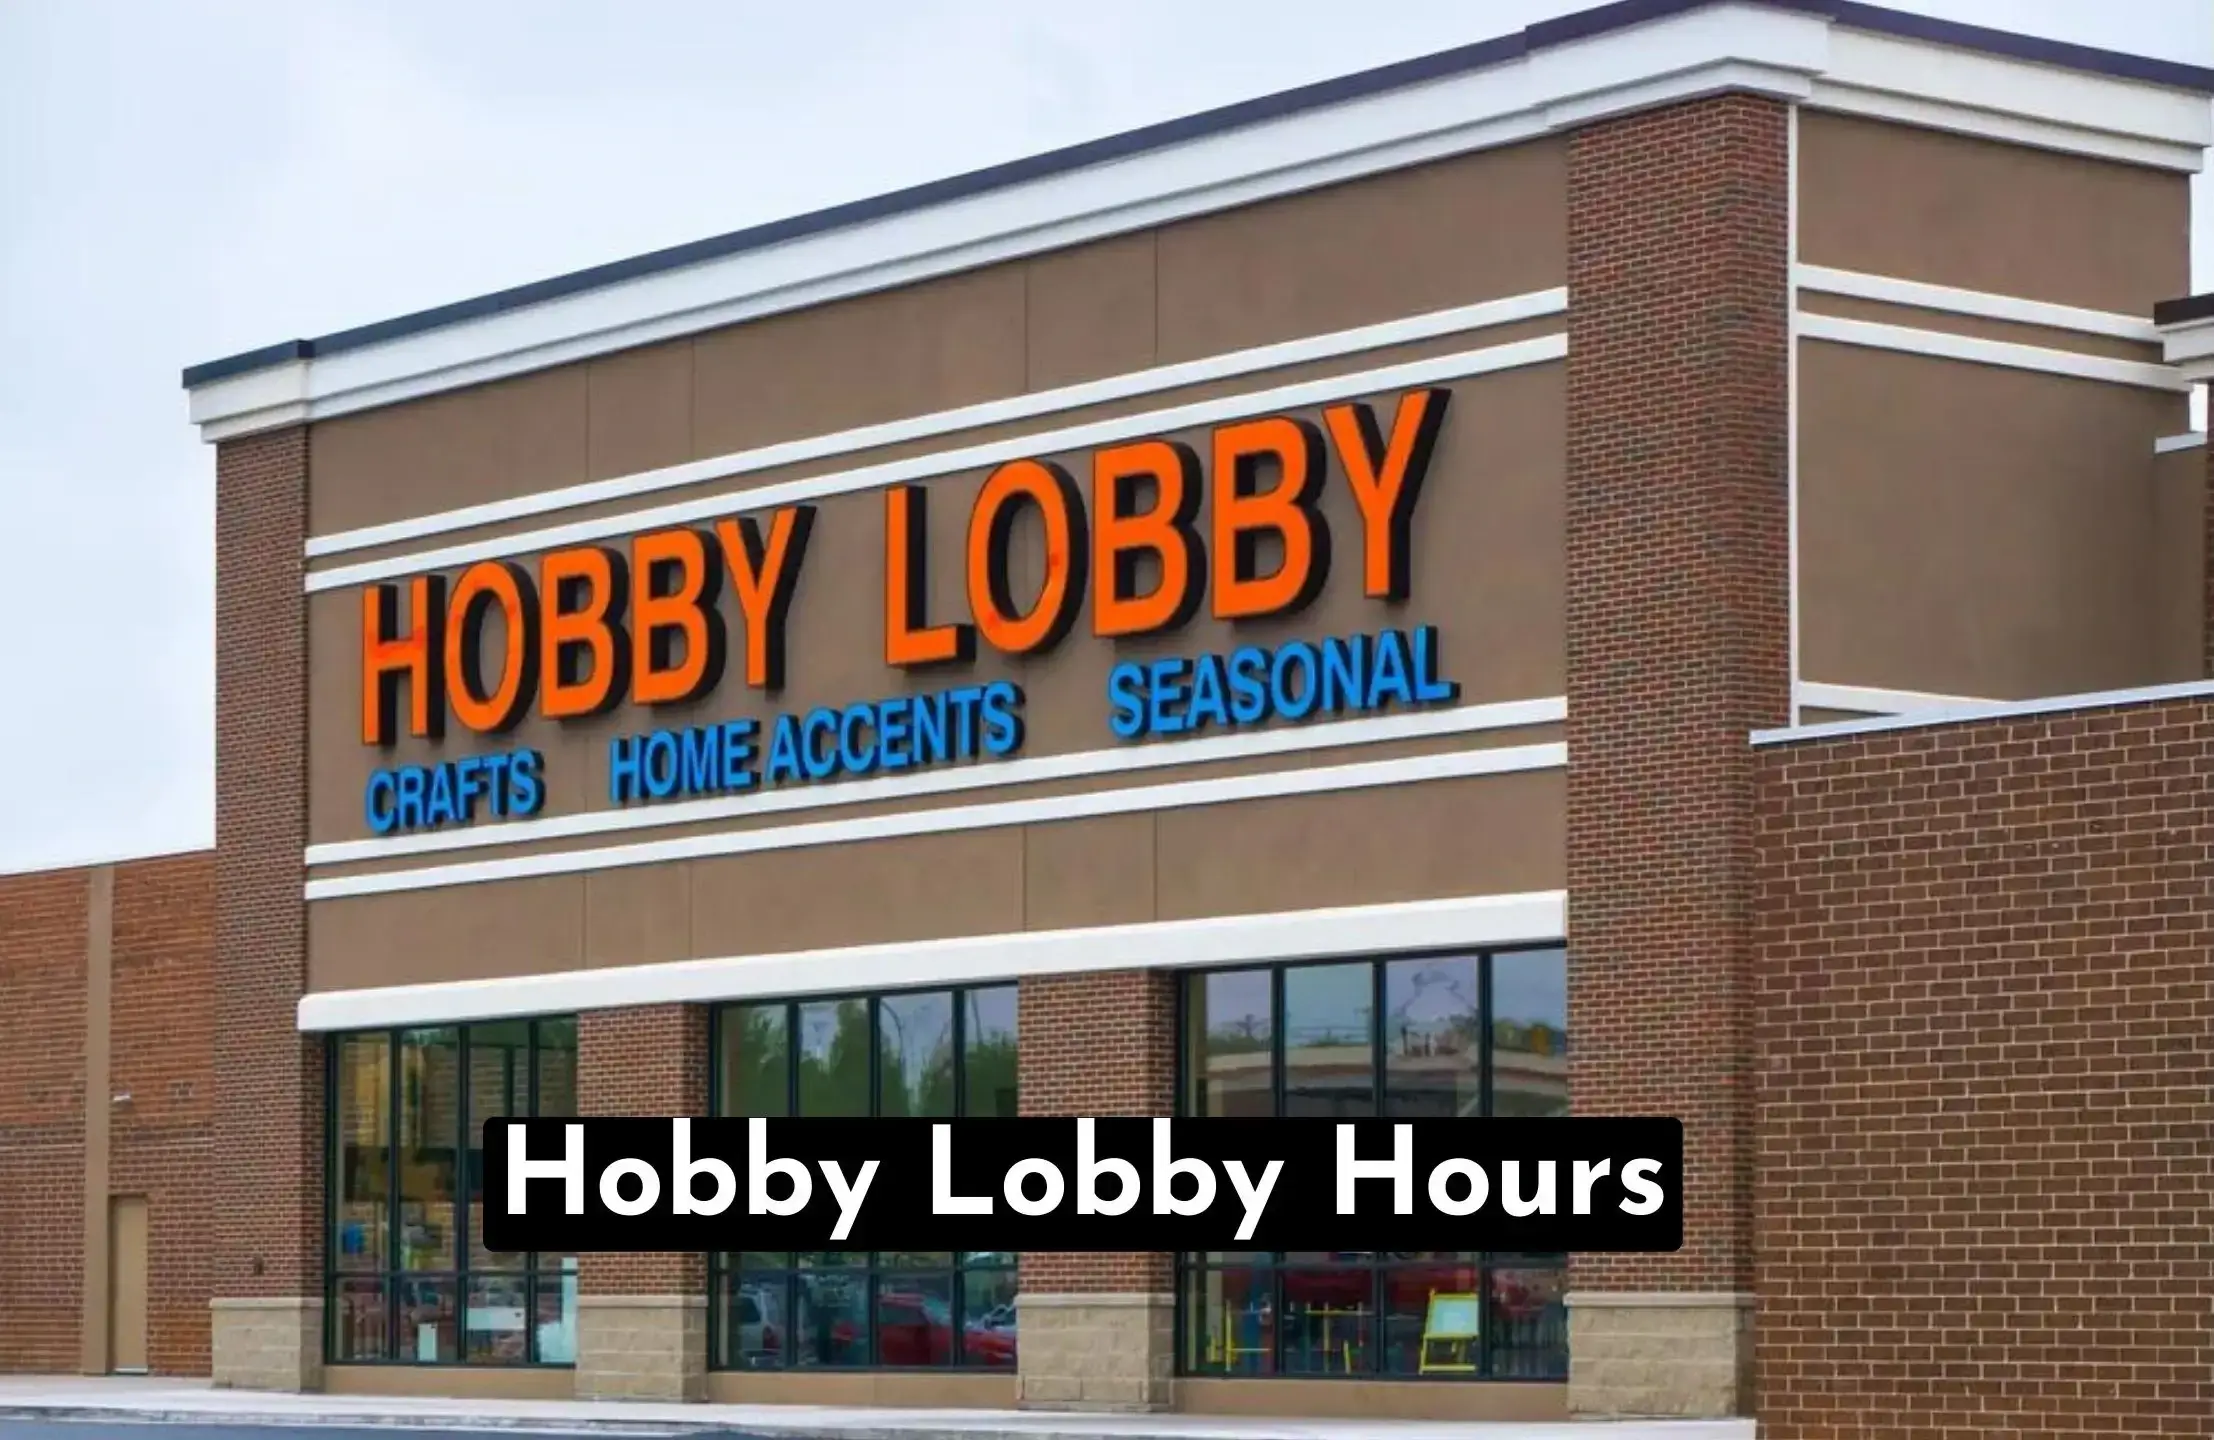 Are you a craft lover and searching for Hobby Lobby hours? Don't miss Hobby Lobby's secret hours! Find out when they're open & close near you!